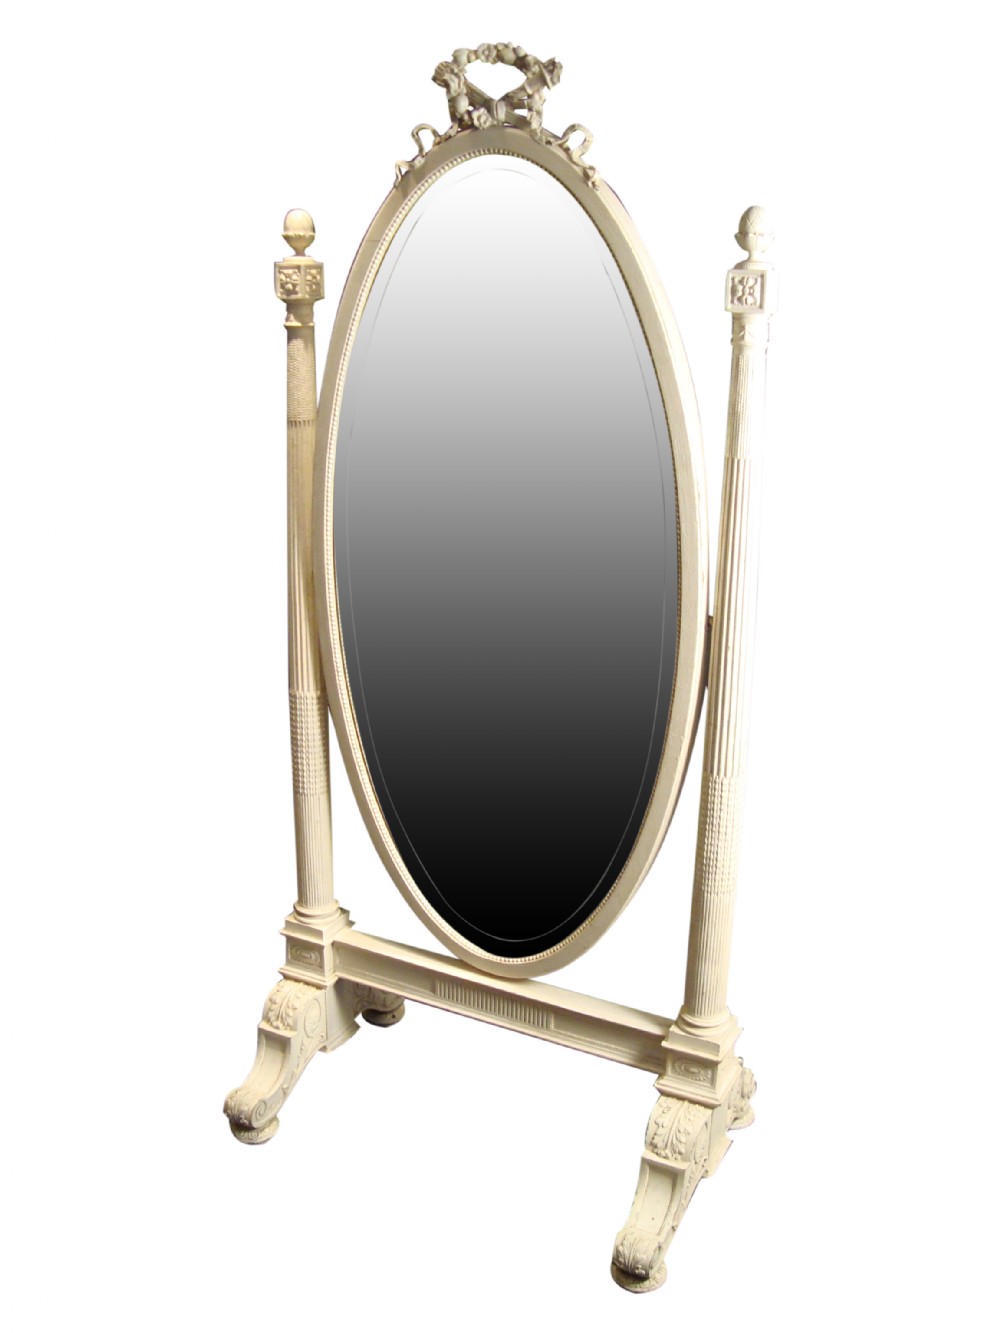 a late 19th century french neoclassical revival white painted chevel mirror